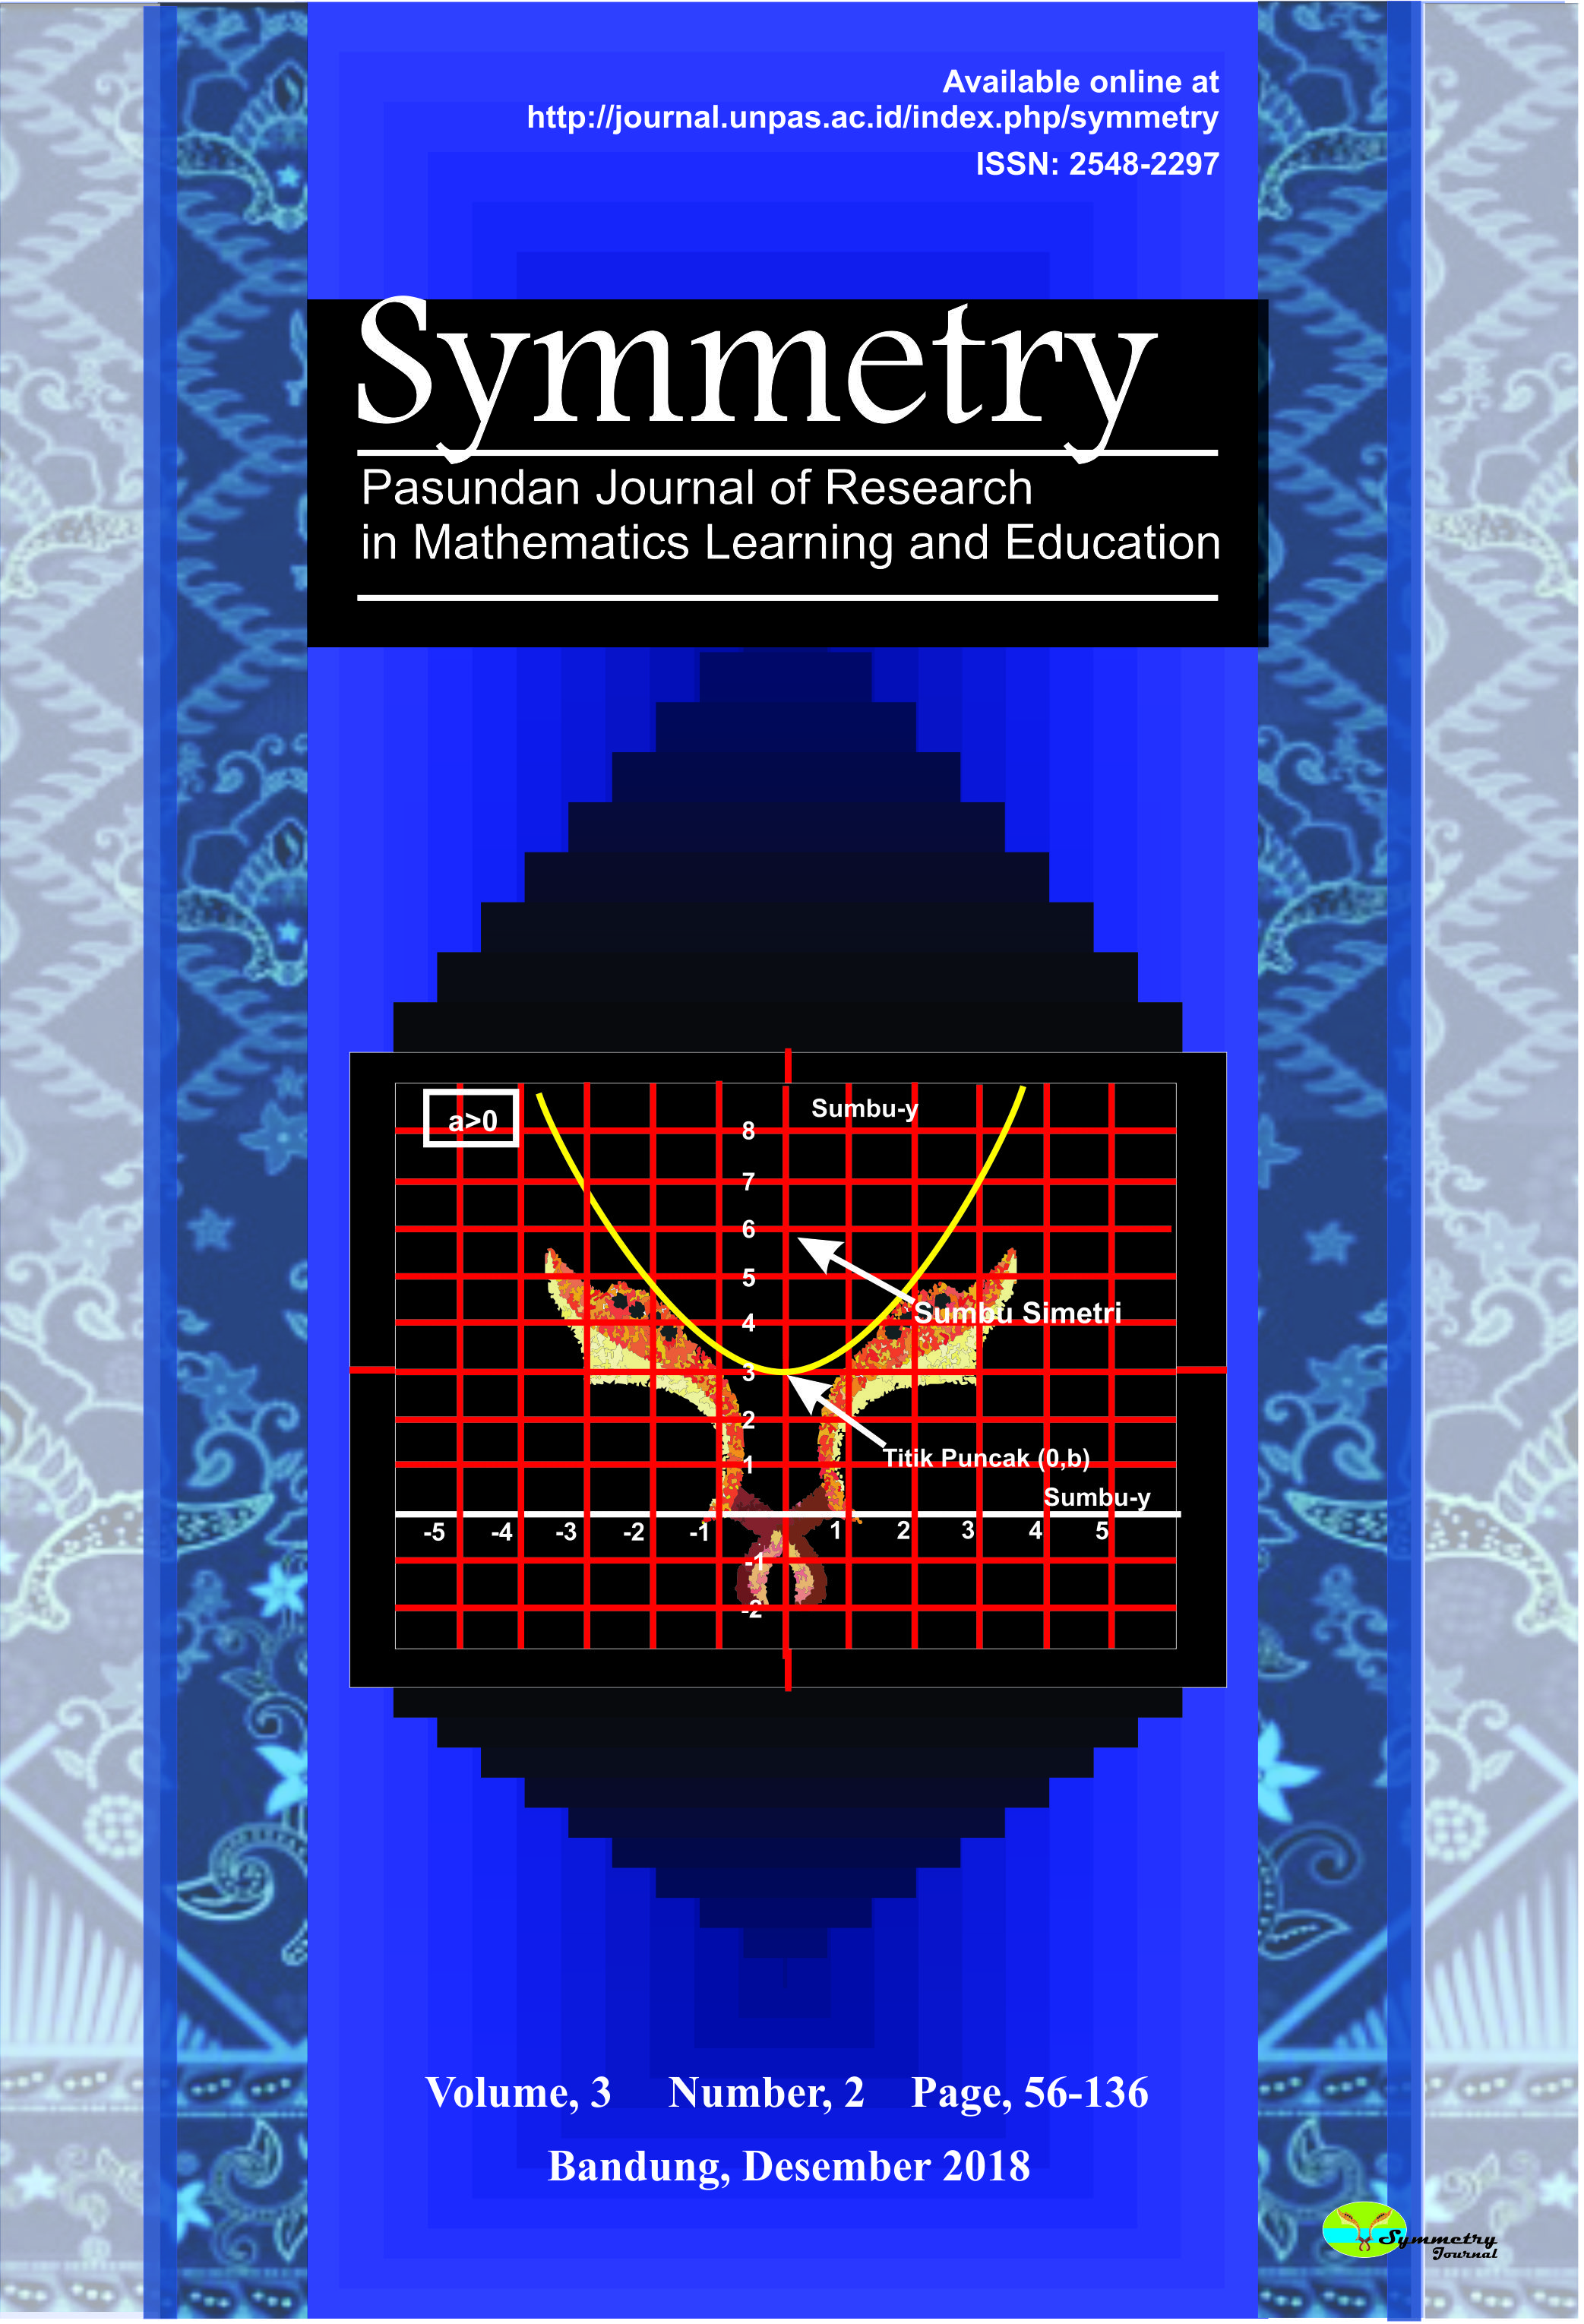 					Lihat Vol 6 No 2 (2021): Symmetry: Pasundan Journal of Research in Mathematics Learning and Education
				